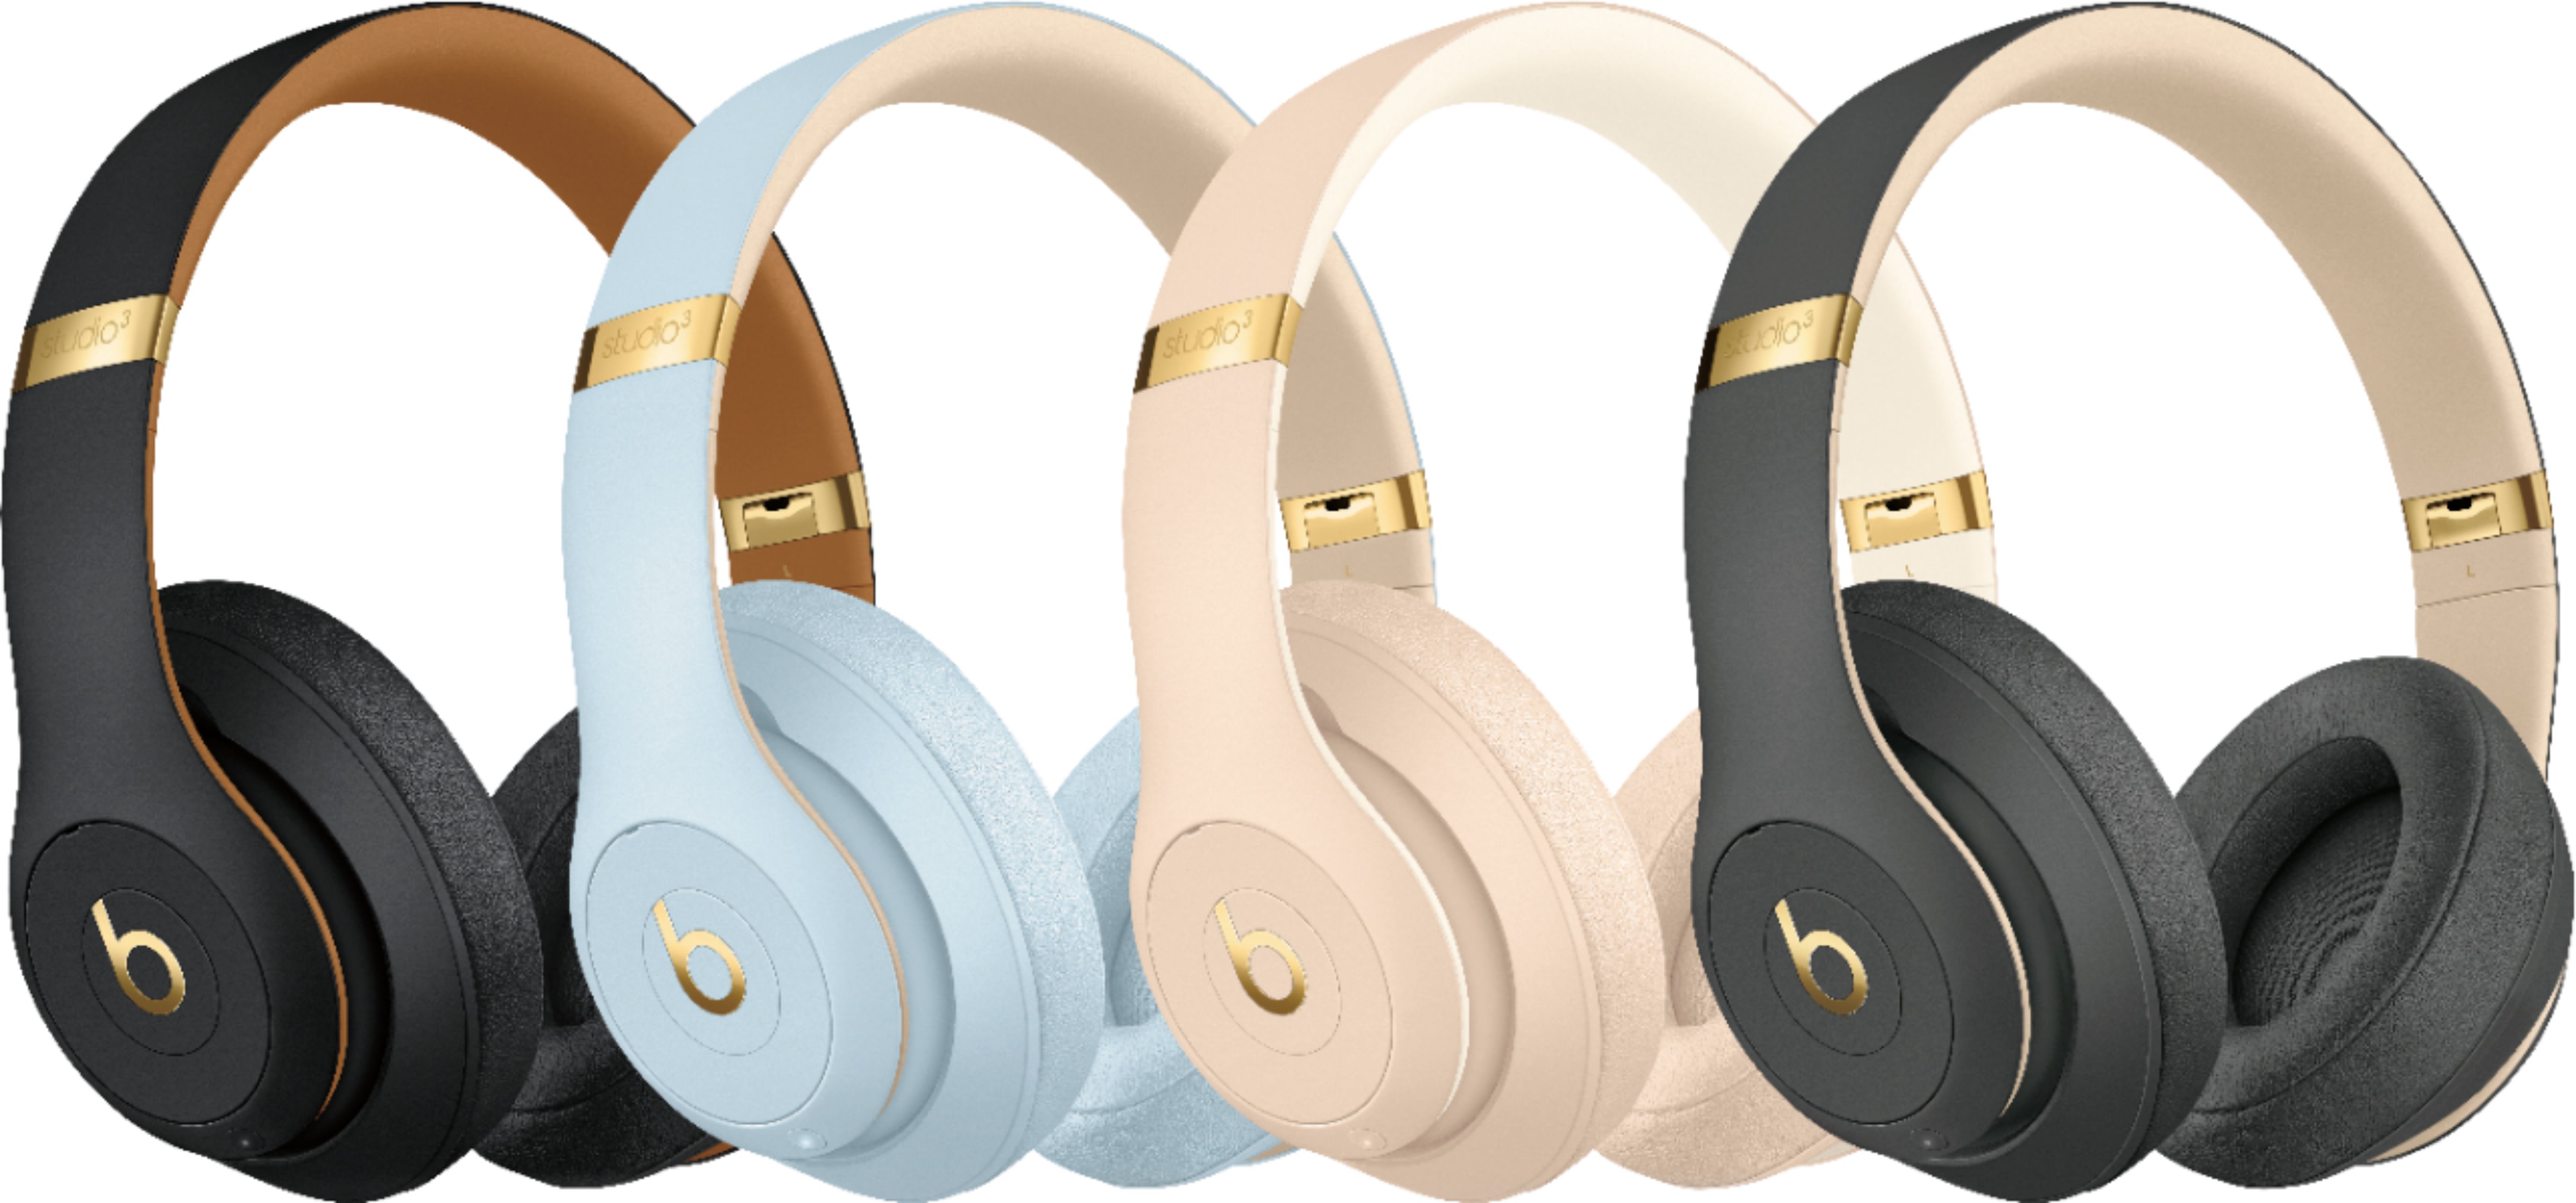 Questions and Answers: Beats by Dr. Dre Beats Studio³ Wireless